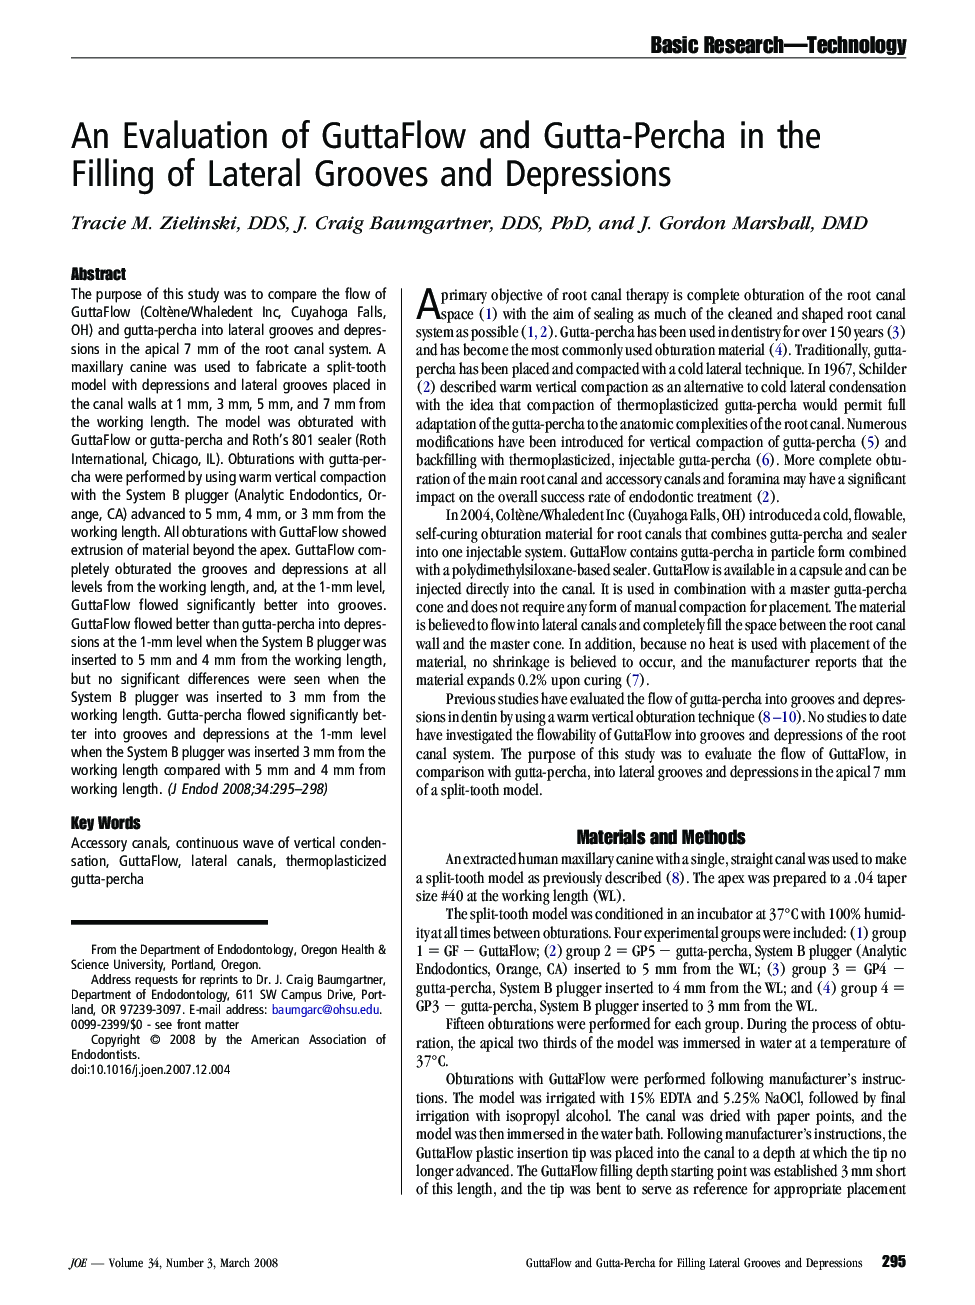 An Evaluation of GuttaFlow and Gutta-Percha in the Filling of Lateral Grooves and Depressions